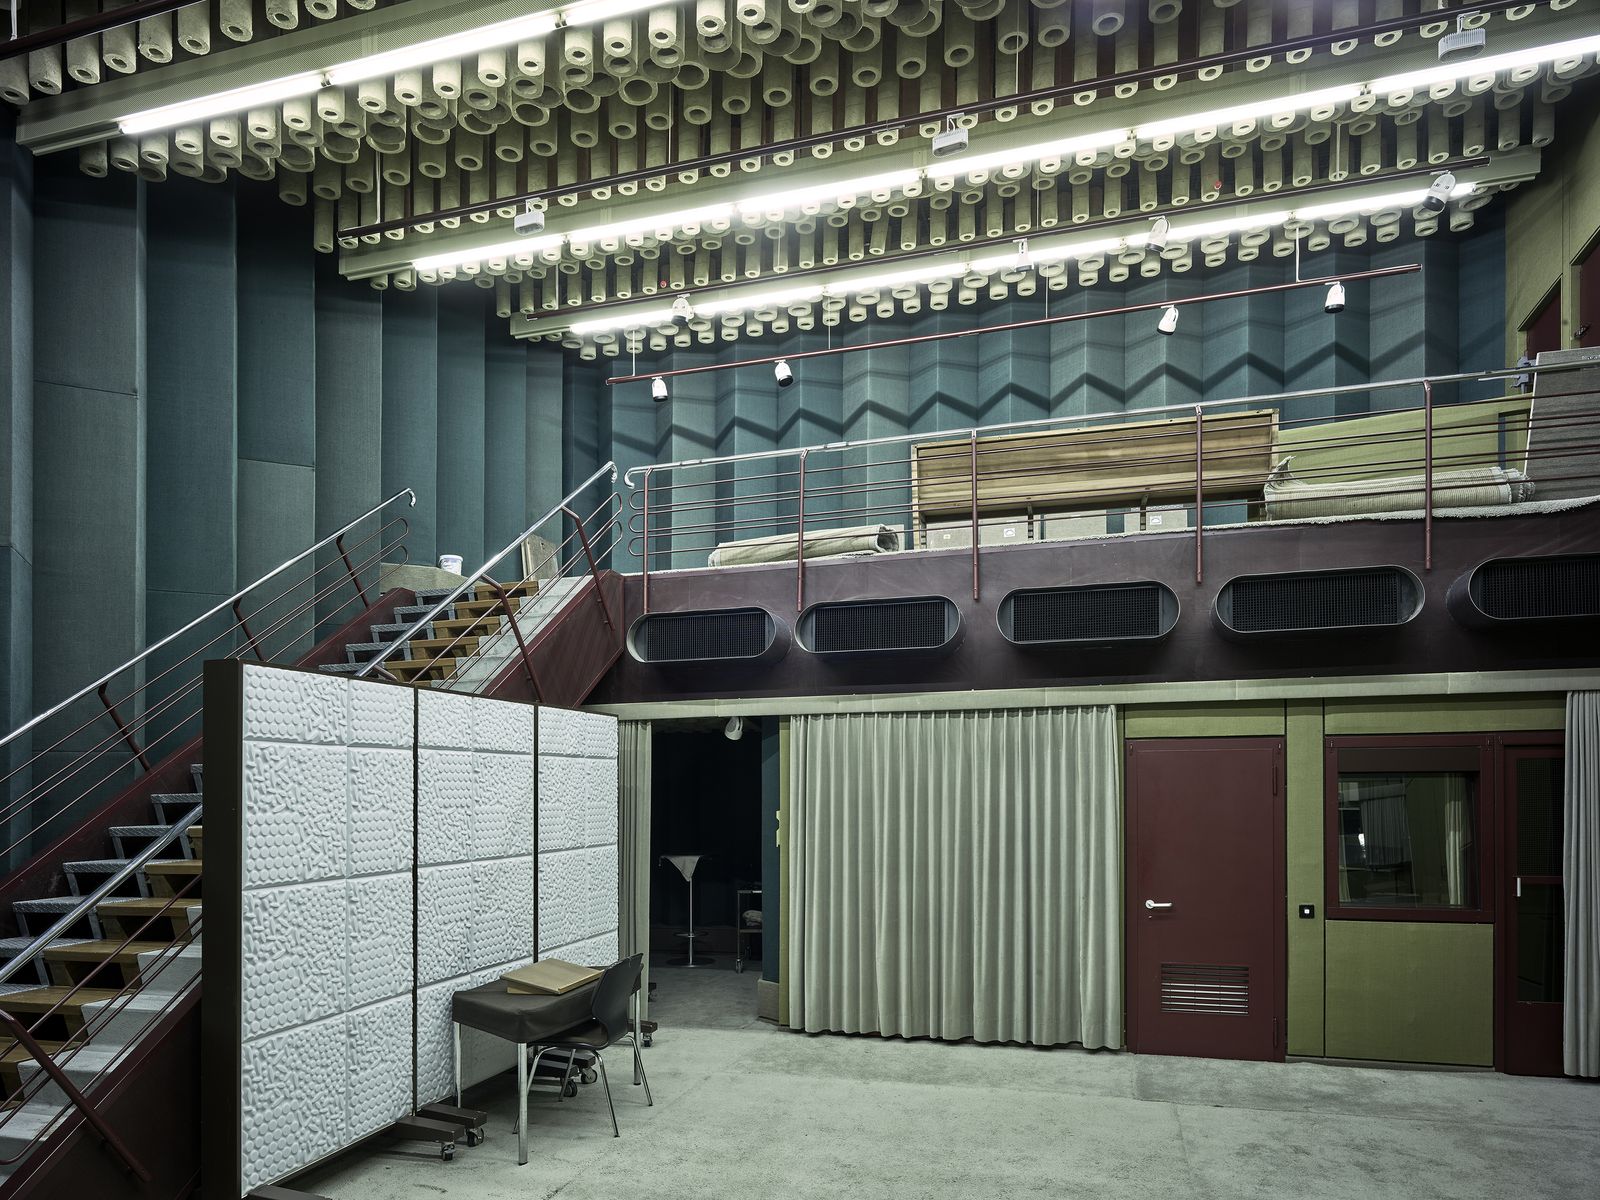 © Kostas Maros - former radio studio of the swiss national broadcast station in Basel. This room will be demolished in the next years.